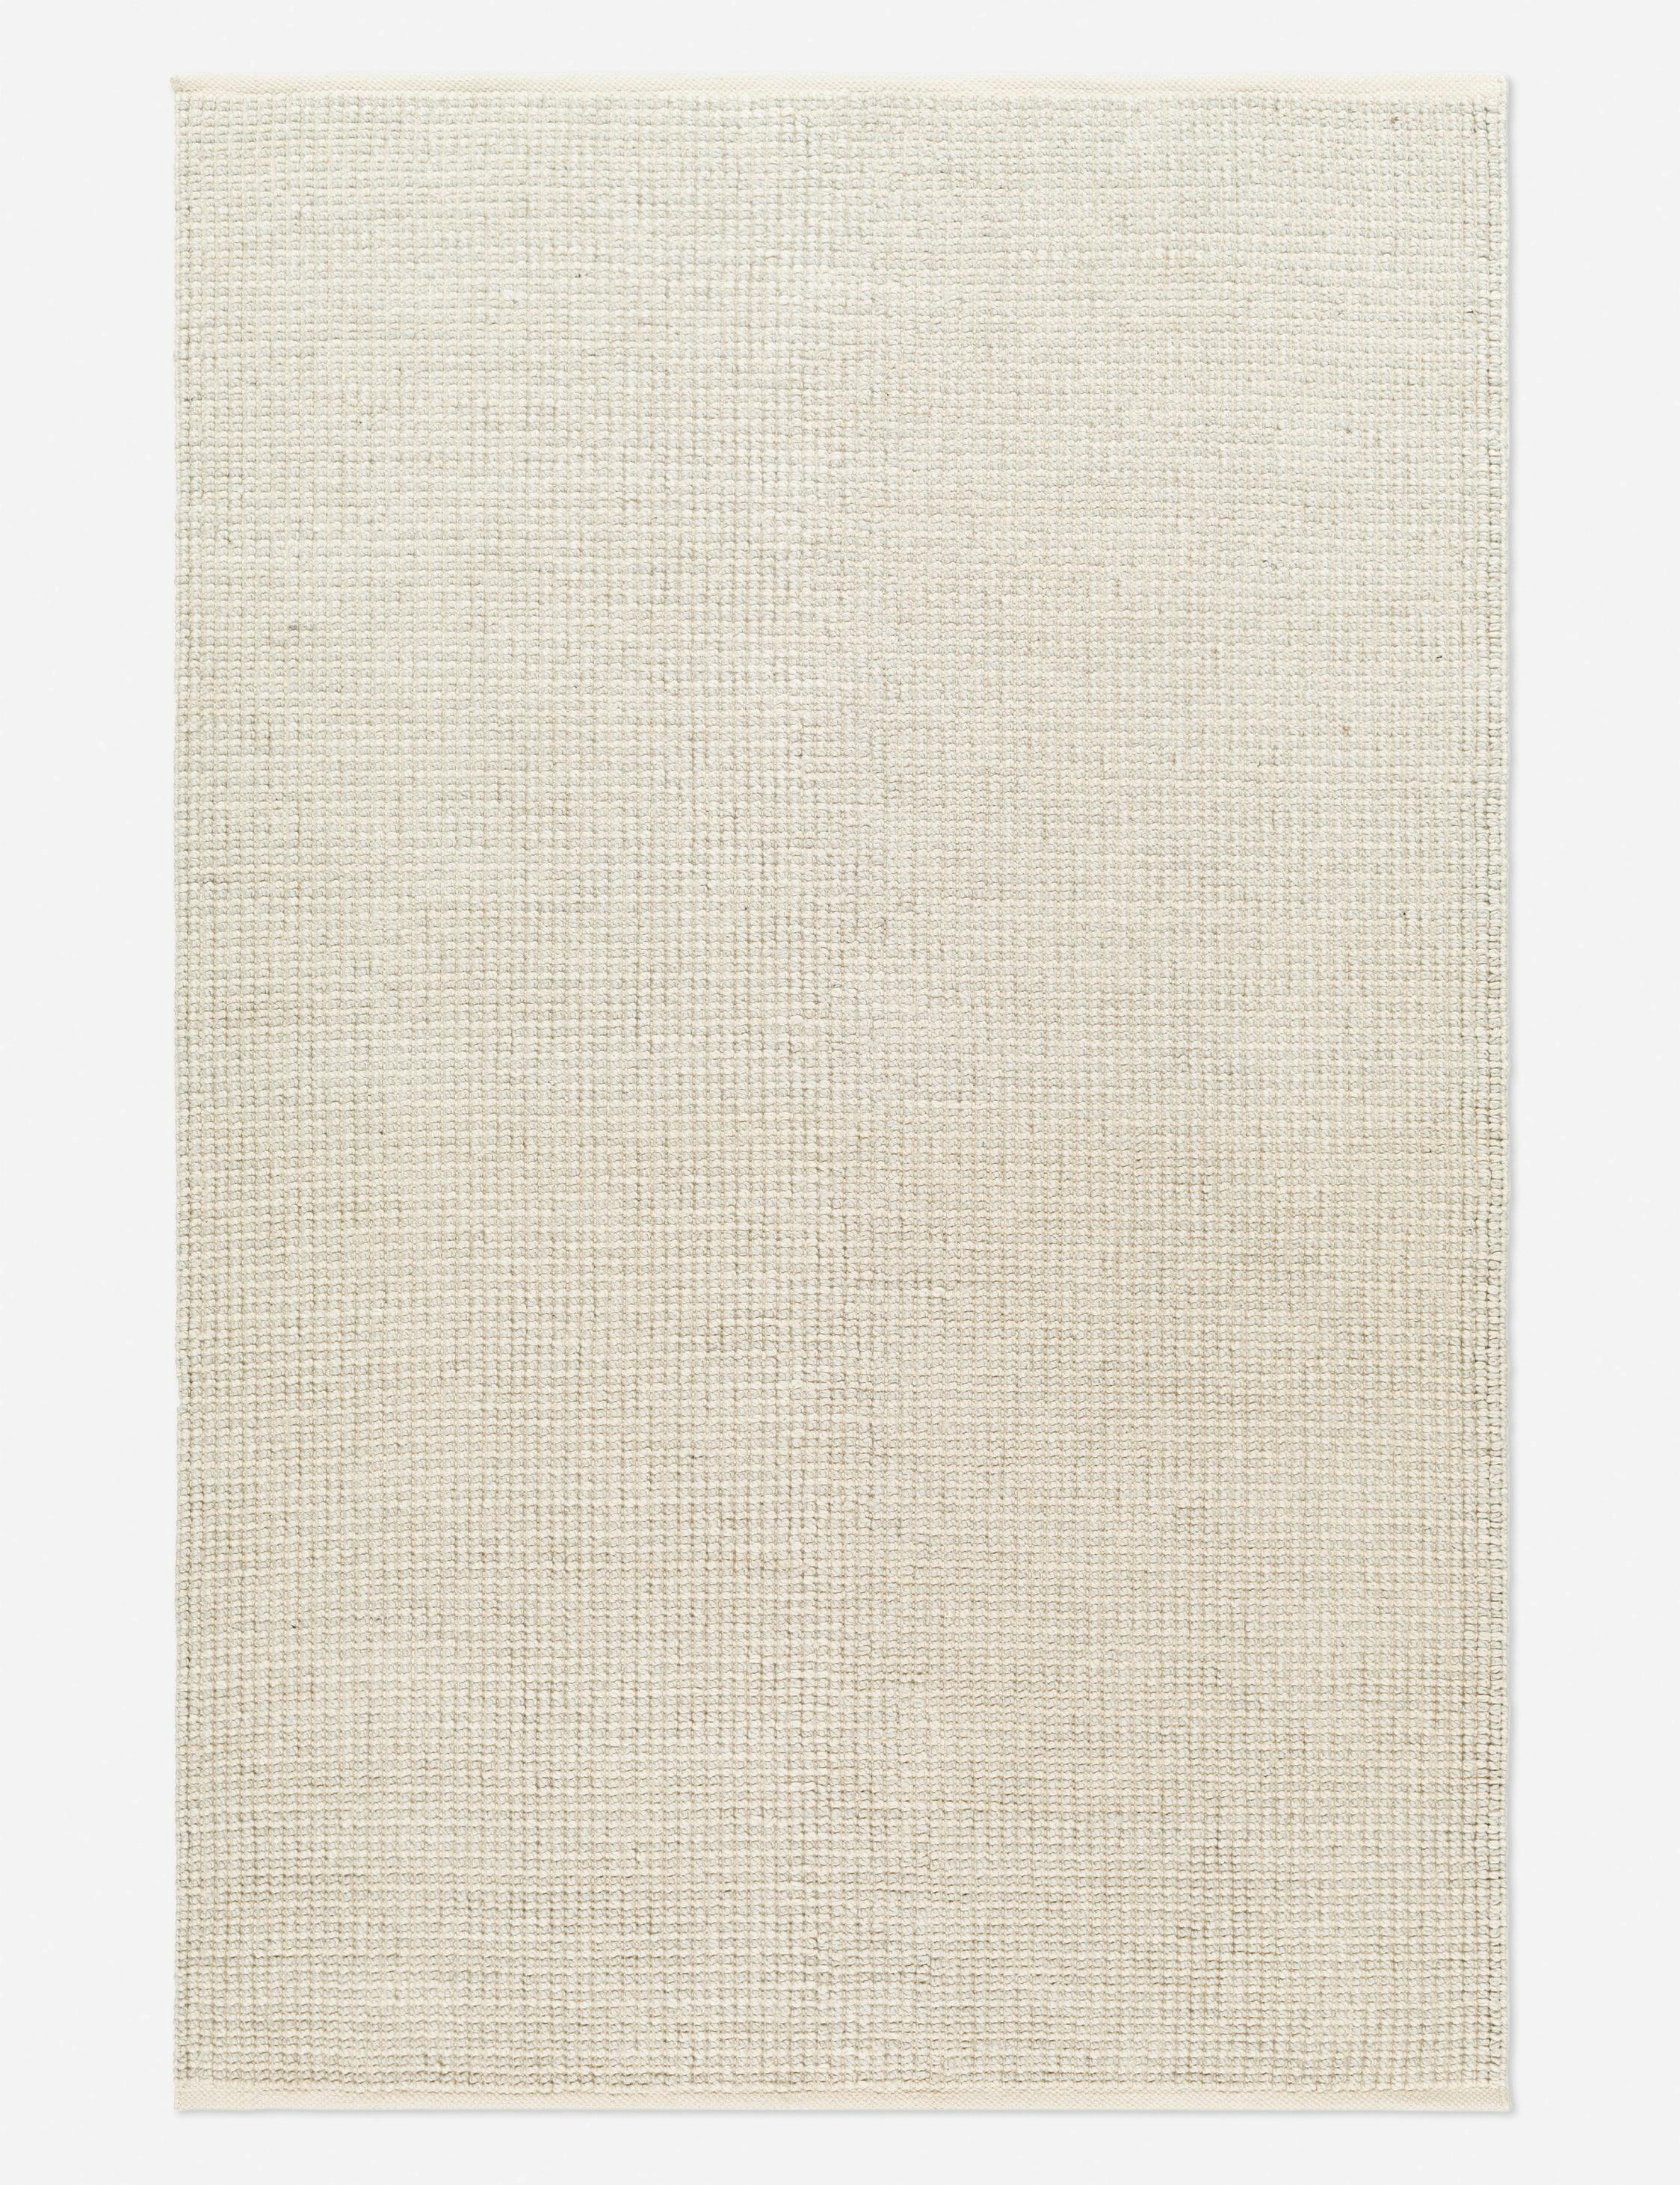 Eco-Friendly Handwoven Gray Spot Rug 5' x 7' - Easy Care